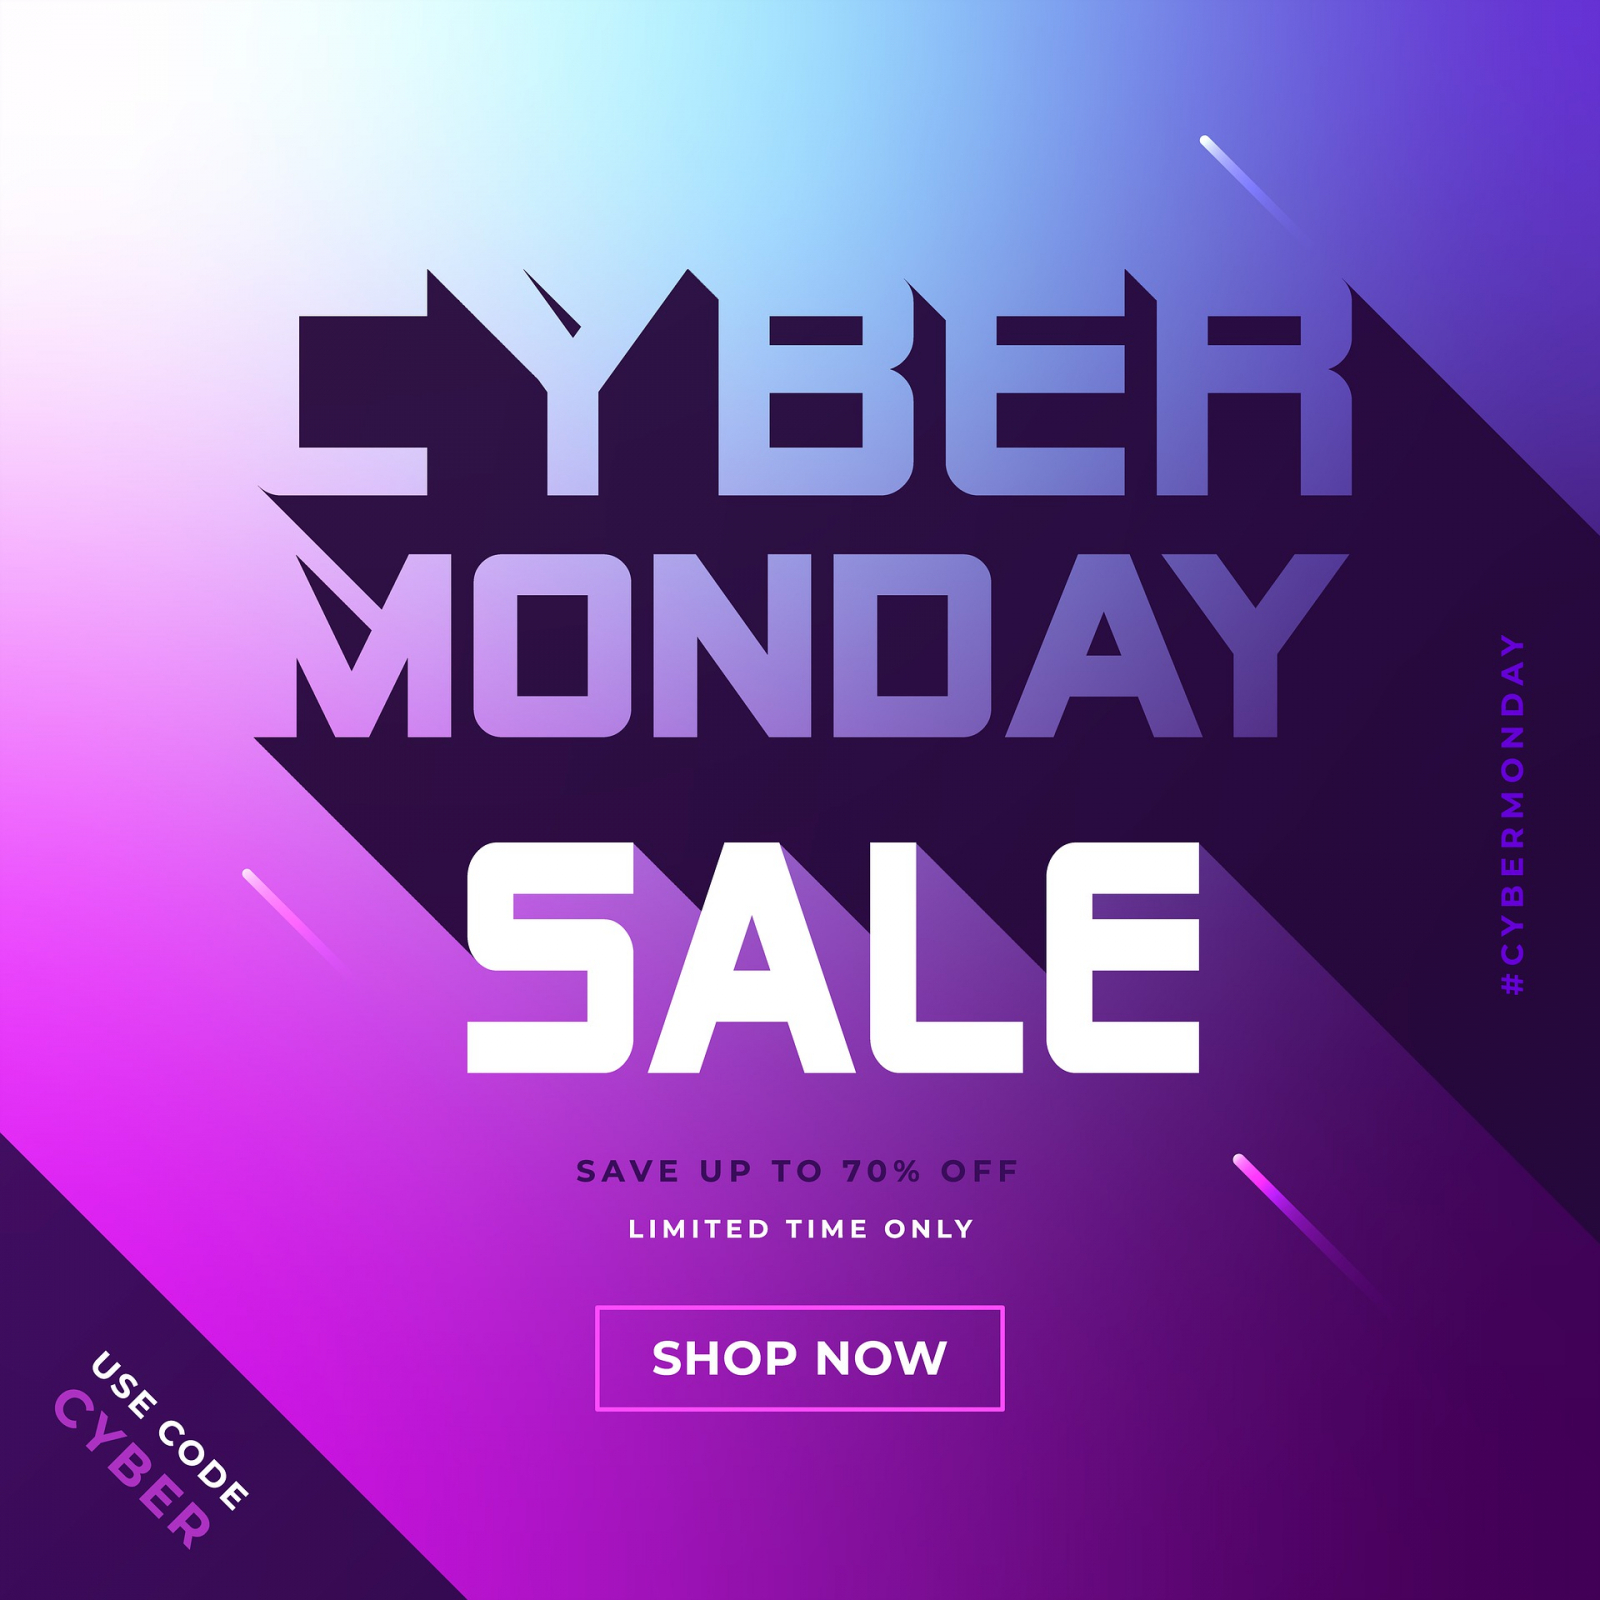 Cyber Monday sales hit a record high of $9.4 billion making it the